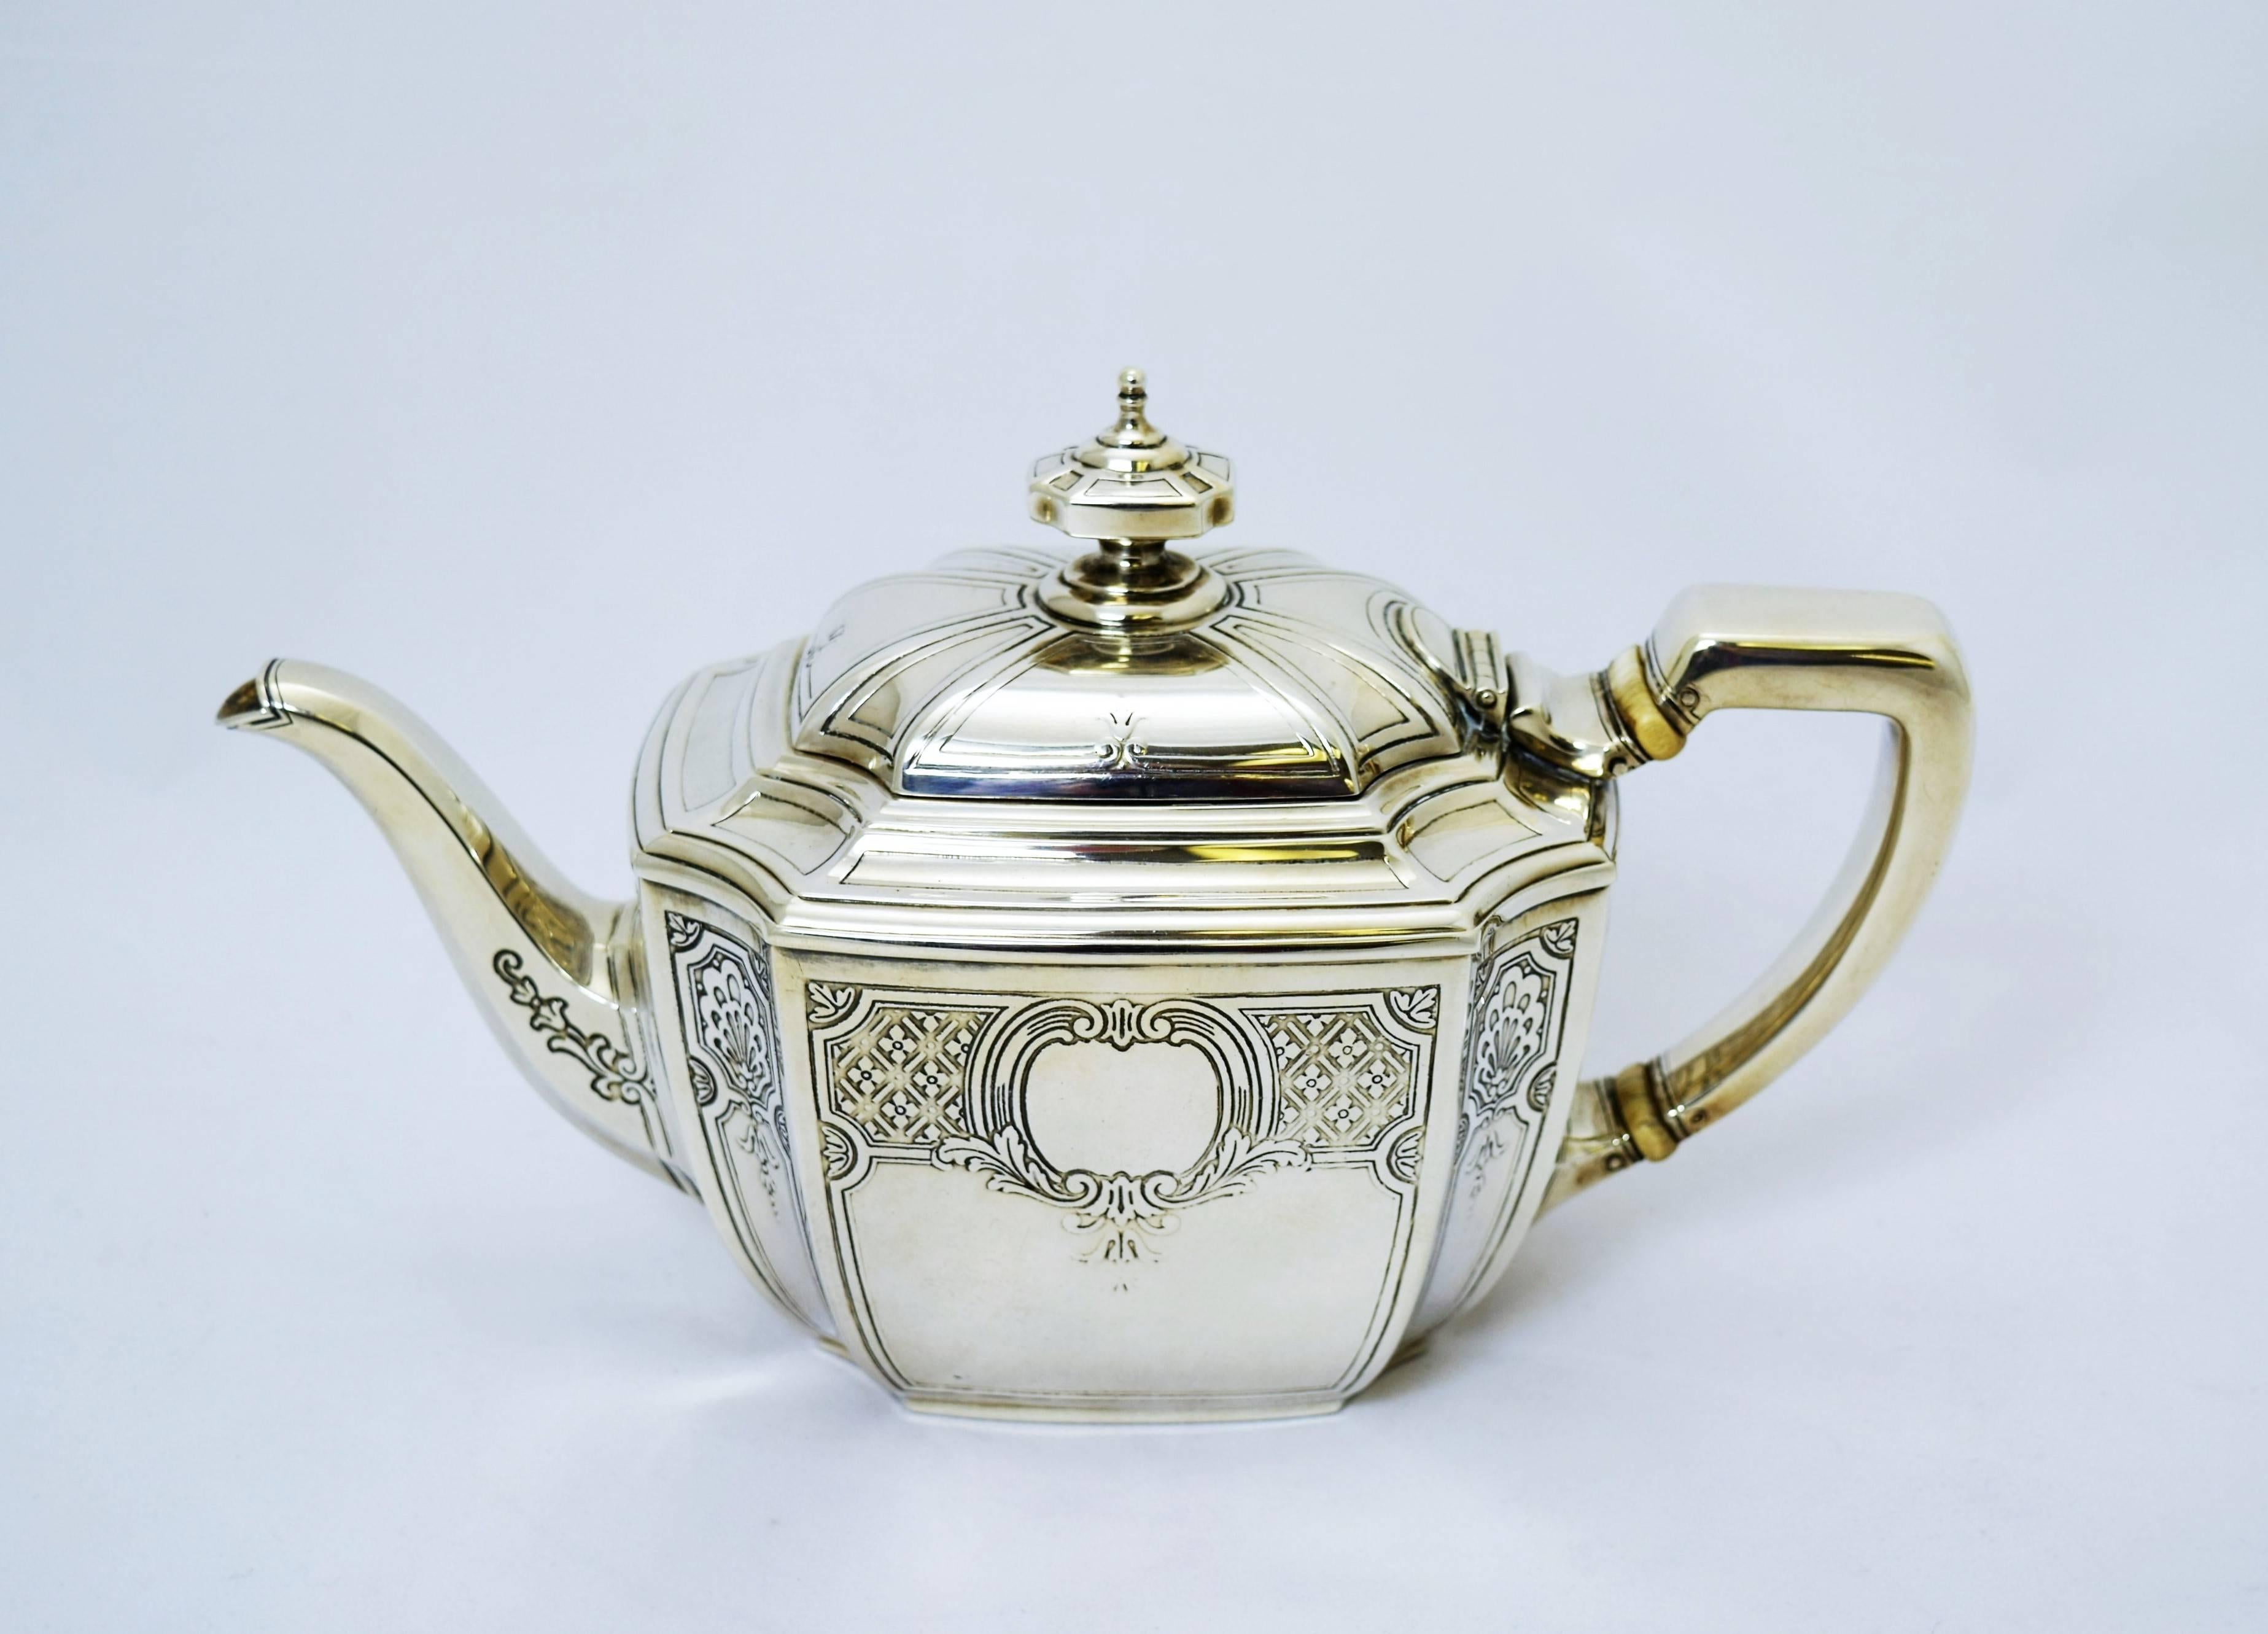 Early 20th Century Tiffany & Co. Sterling Silver Tea and Coffee Set, circa 1915